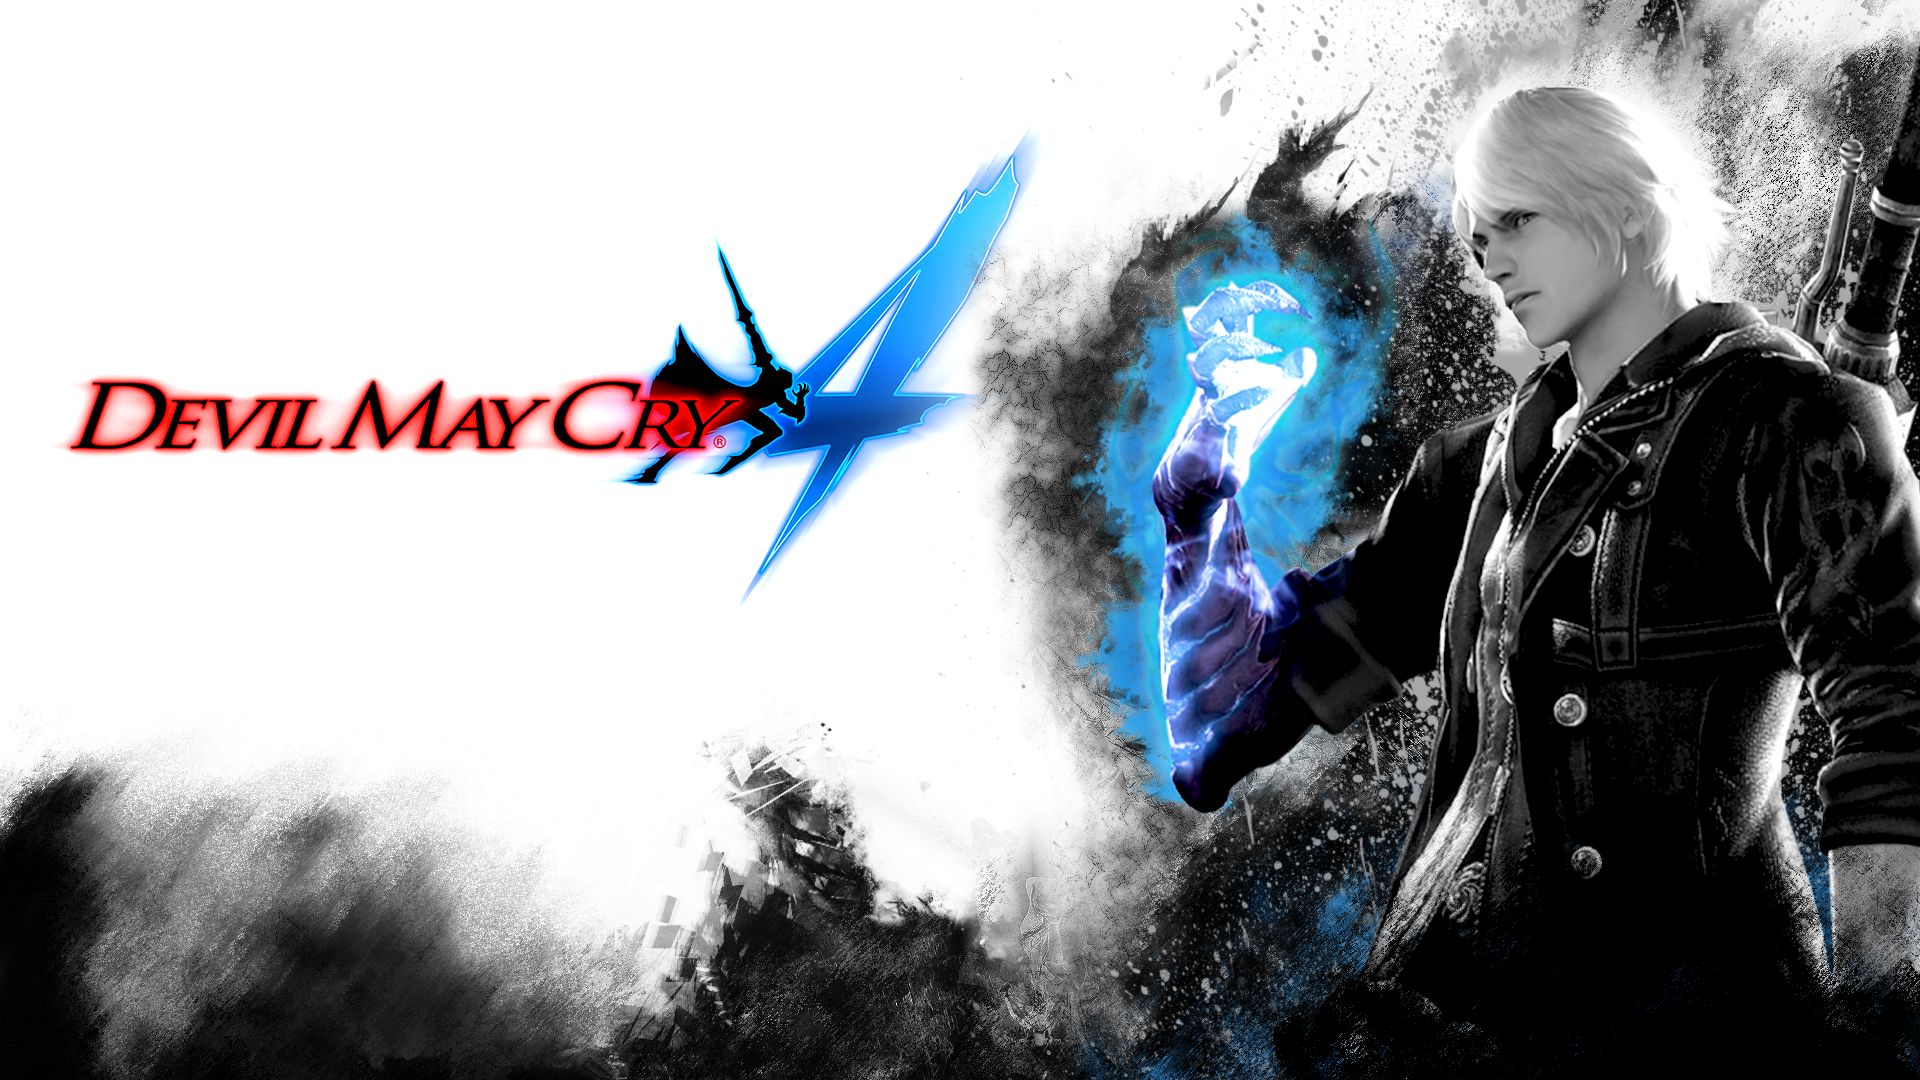 video game, devil may cry 4, nero (devil may cry), devil may cry